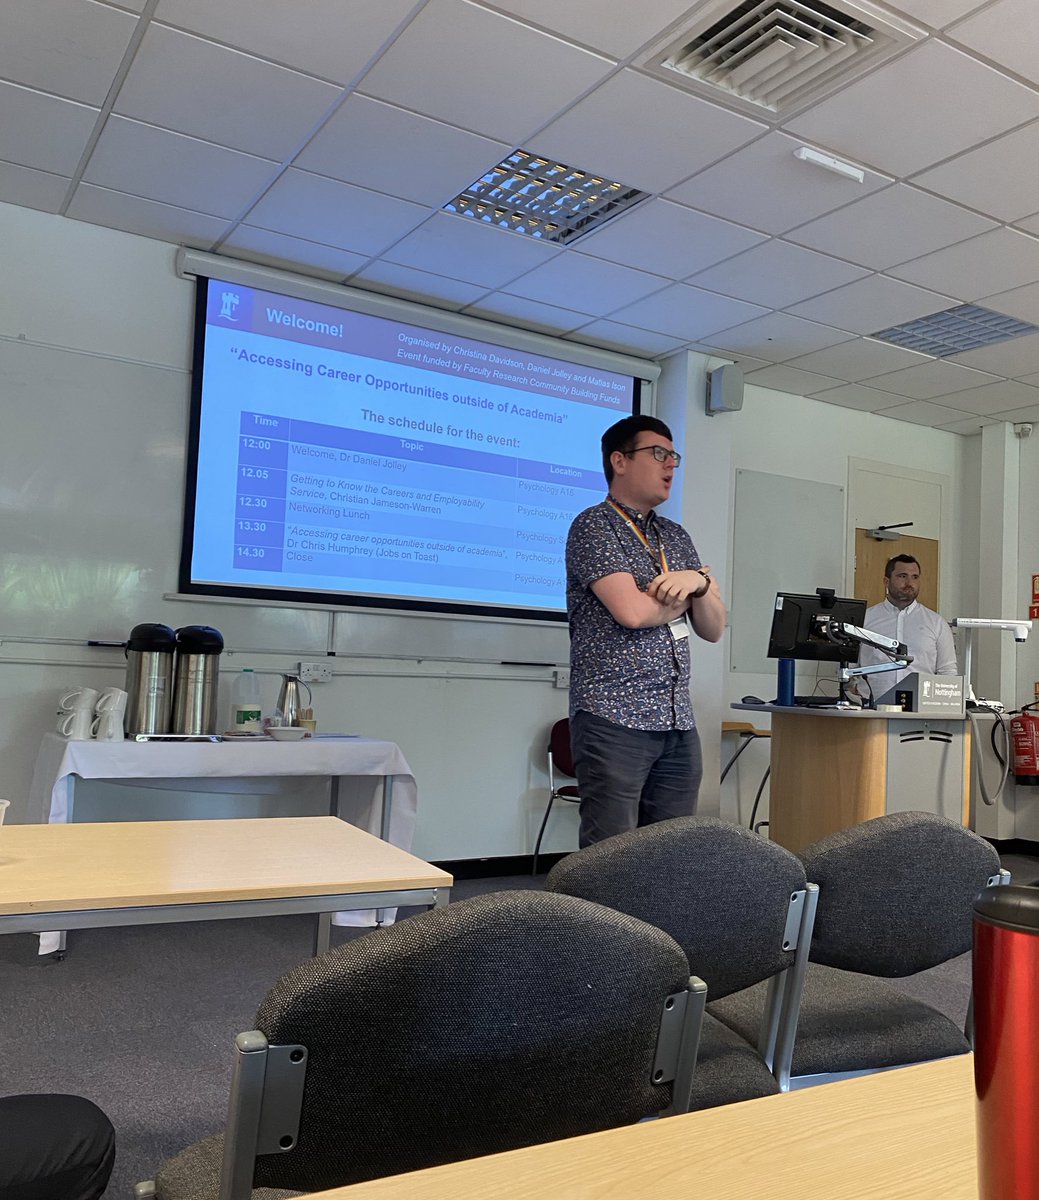 Really enjoyed the ‘Accessing Career Opportunities Outside of Academia’ session I attended today with @chrishumphrey! Thank you @davidsonchri, @DrDanielJolley and @IsonMatias for organising it! @notts_psych